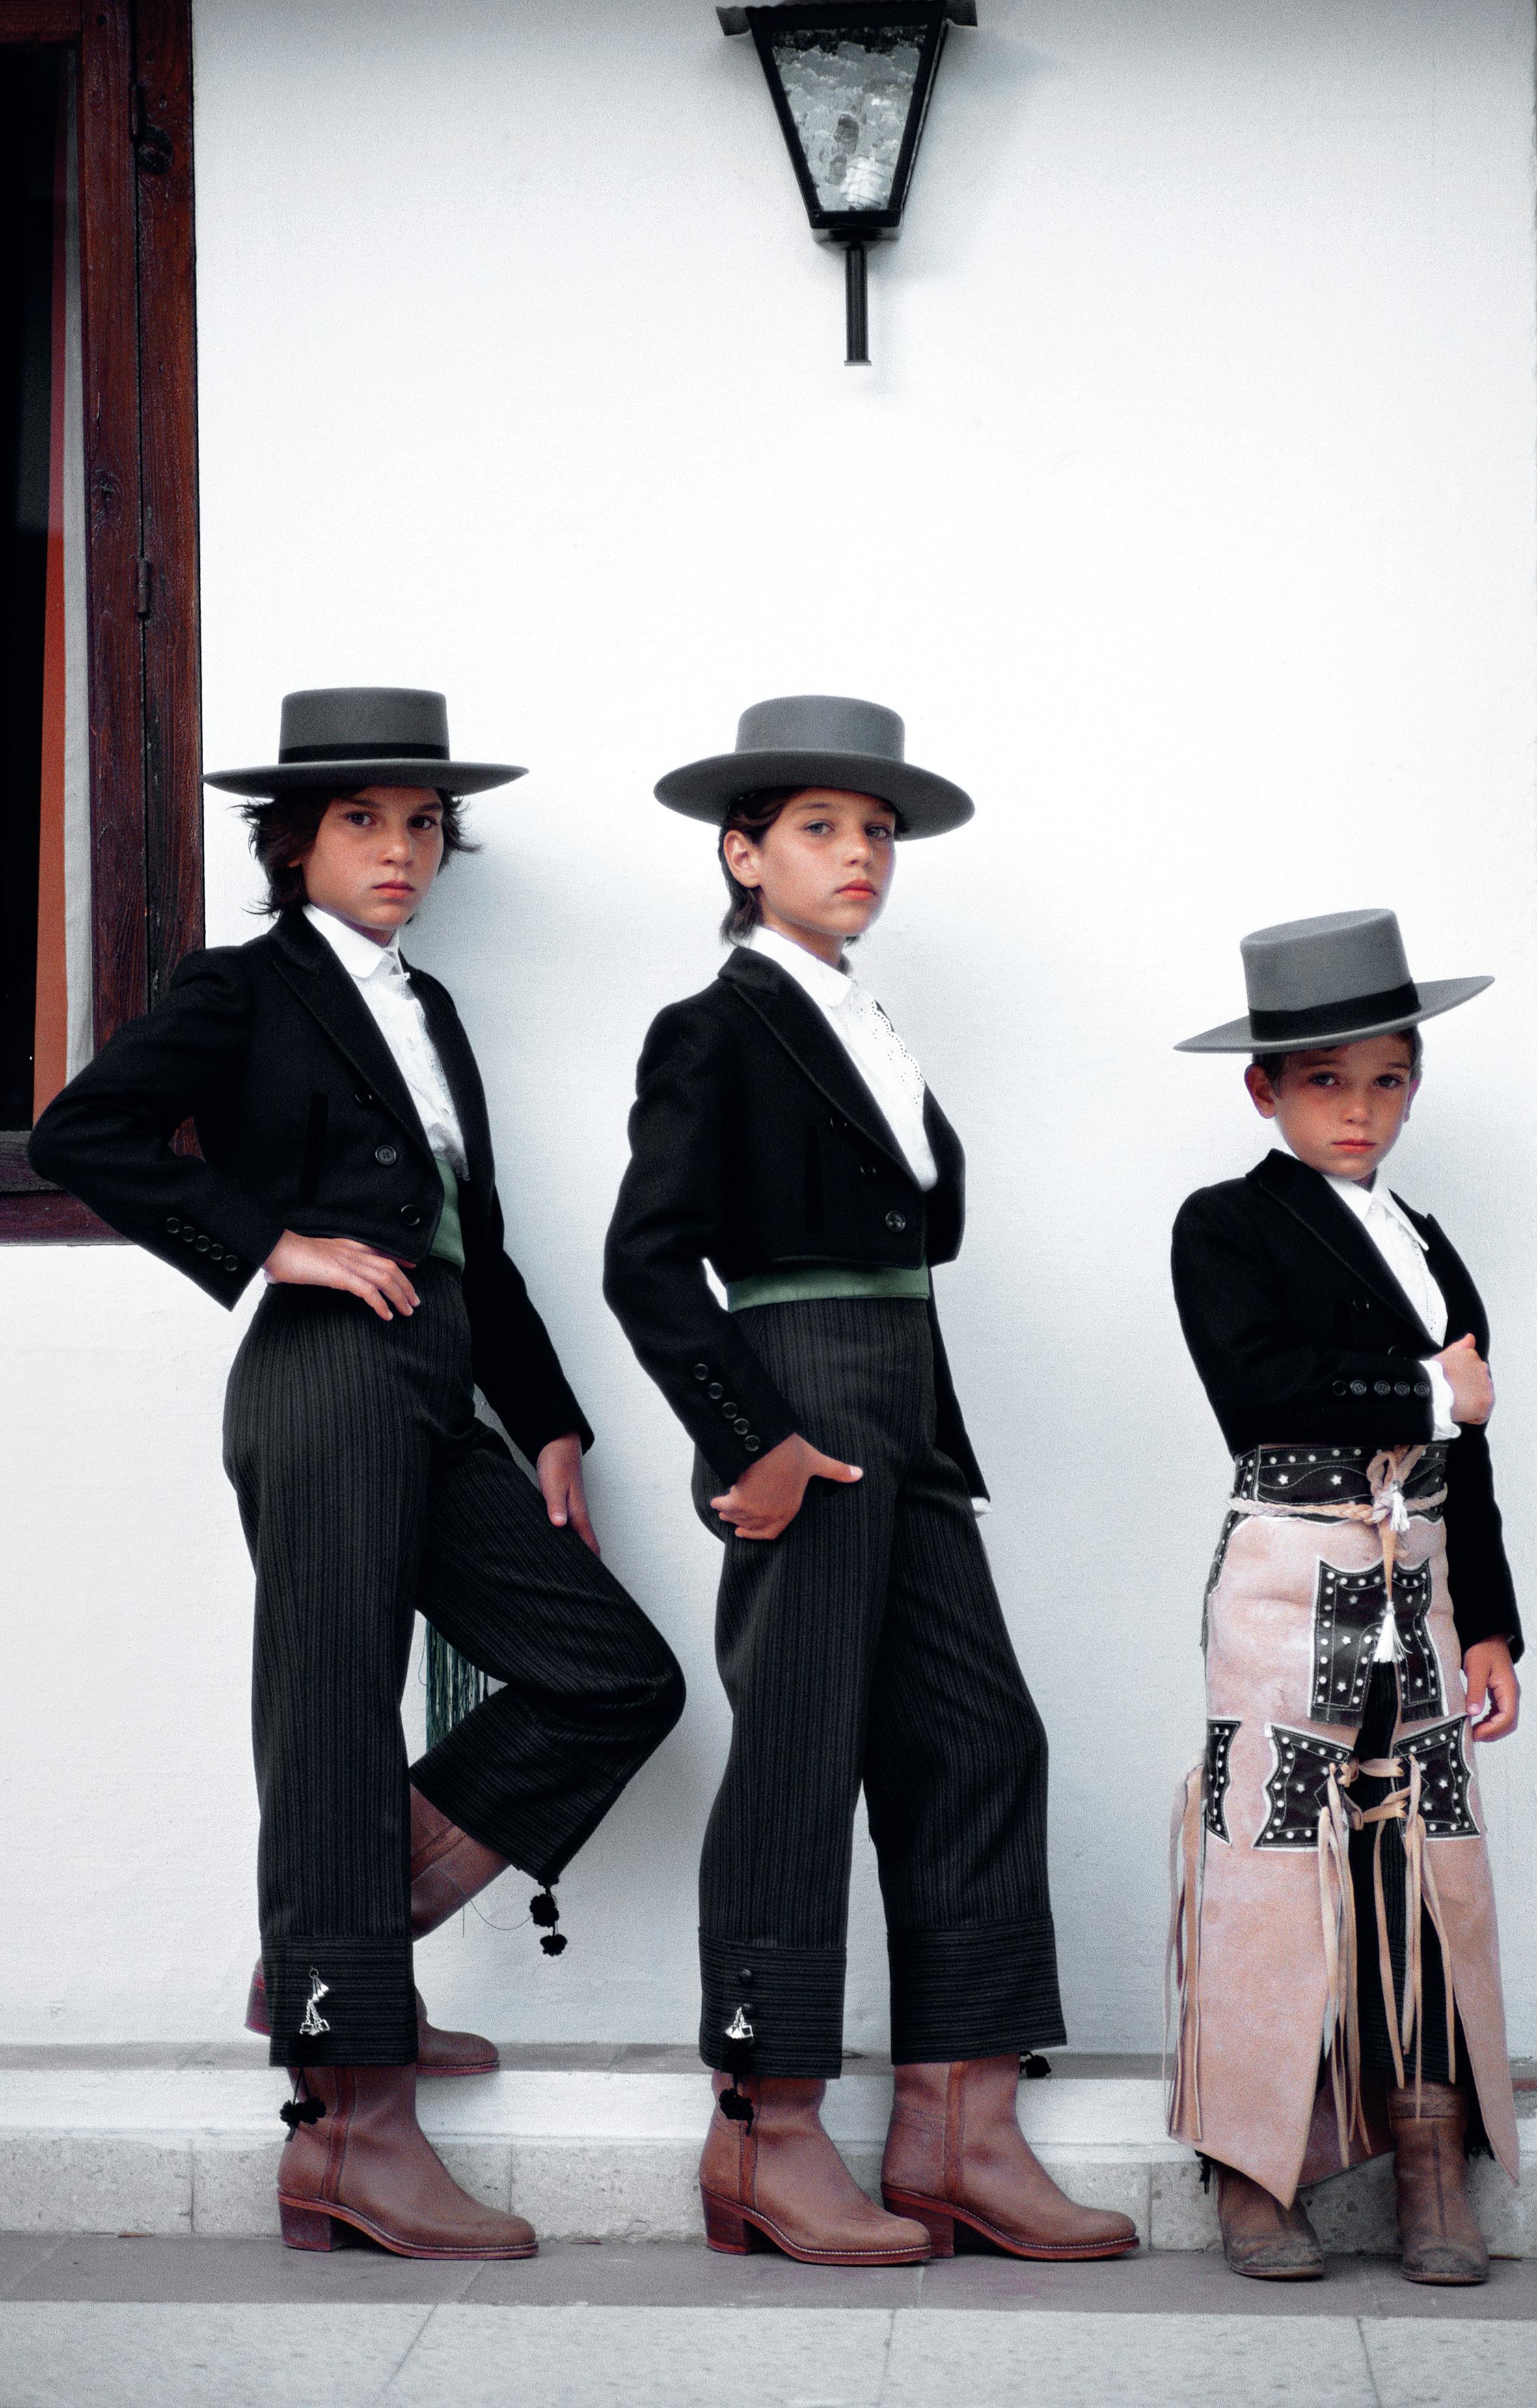 August 1980: In Spanish style riding clothes from l to r; TRH Princess Rajwa Ali, Princess Basma Ali and Prince Bin Ali. (Photo by Slim Aarons/Getty Images)

Slim Aarons Estate Edition, Certificate of Authenticity included
Numbered and stamped by